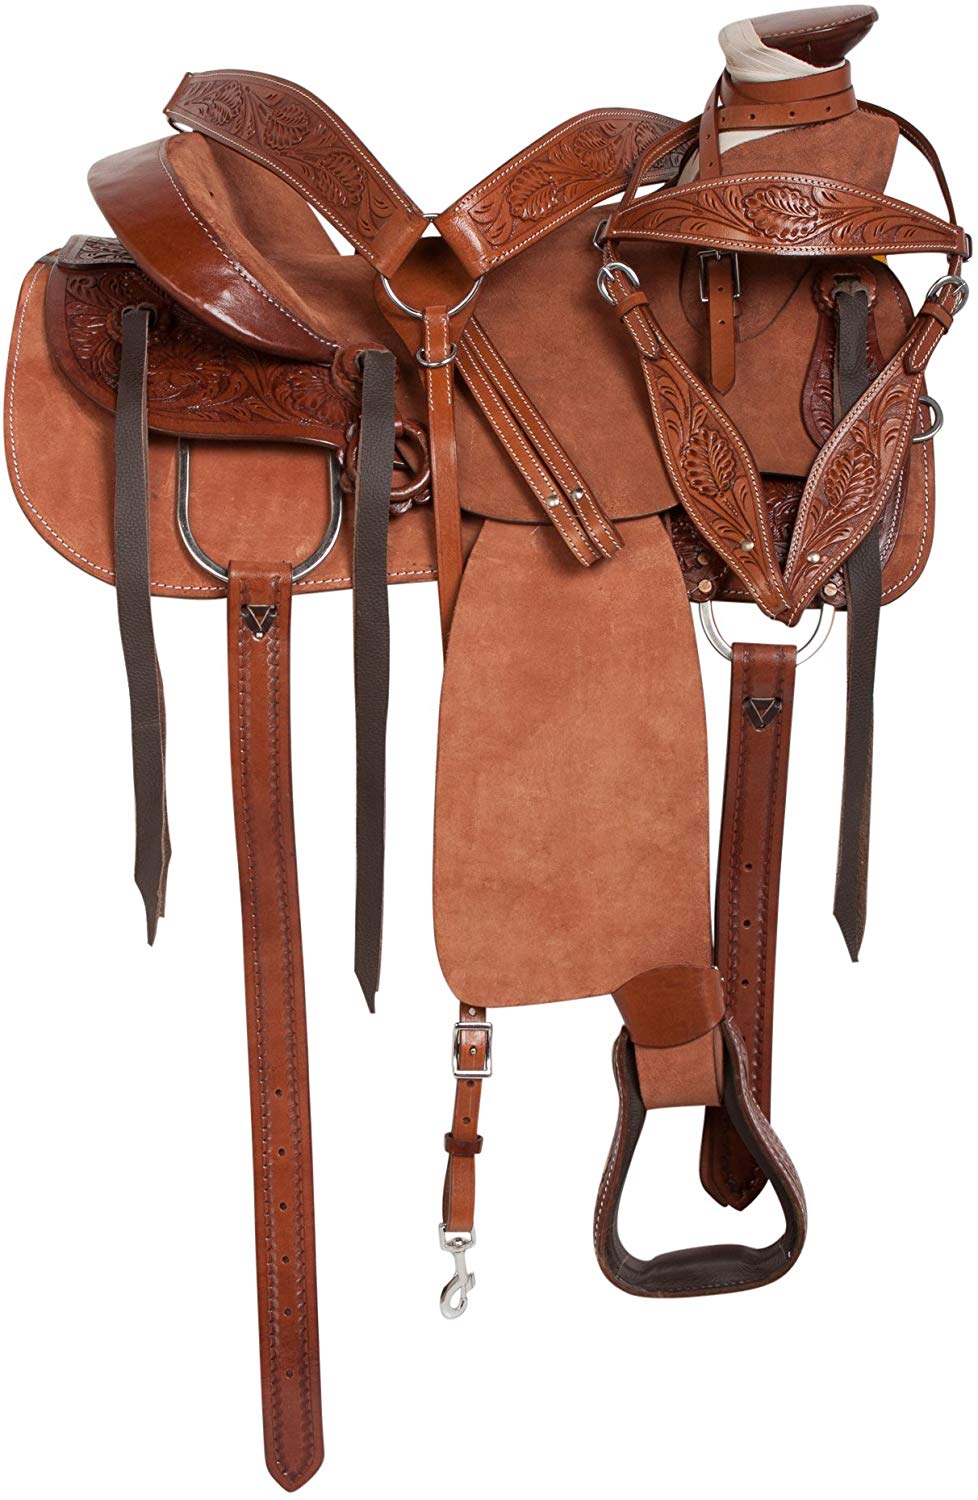 Rough Out Western Trail Ranch Horse Saddle Tack Package